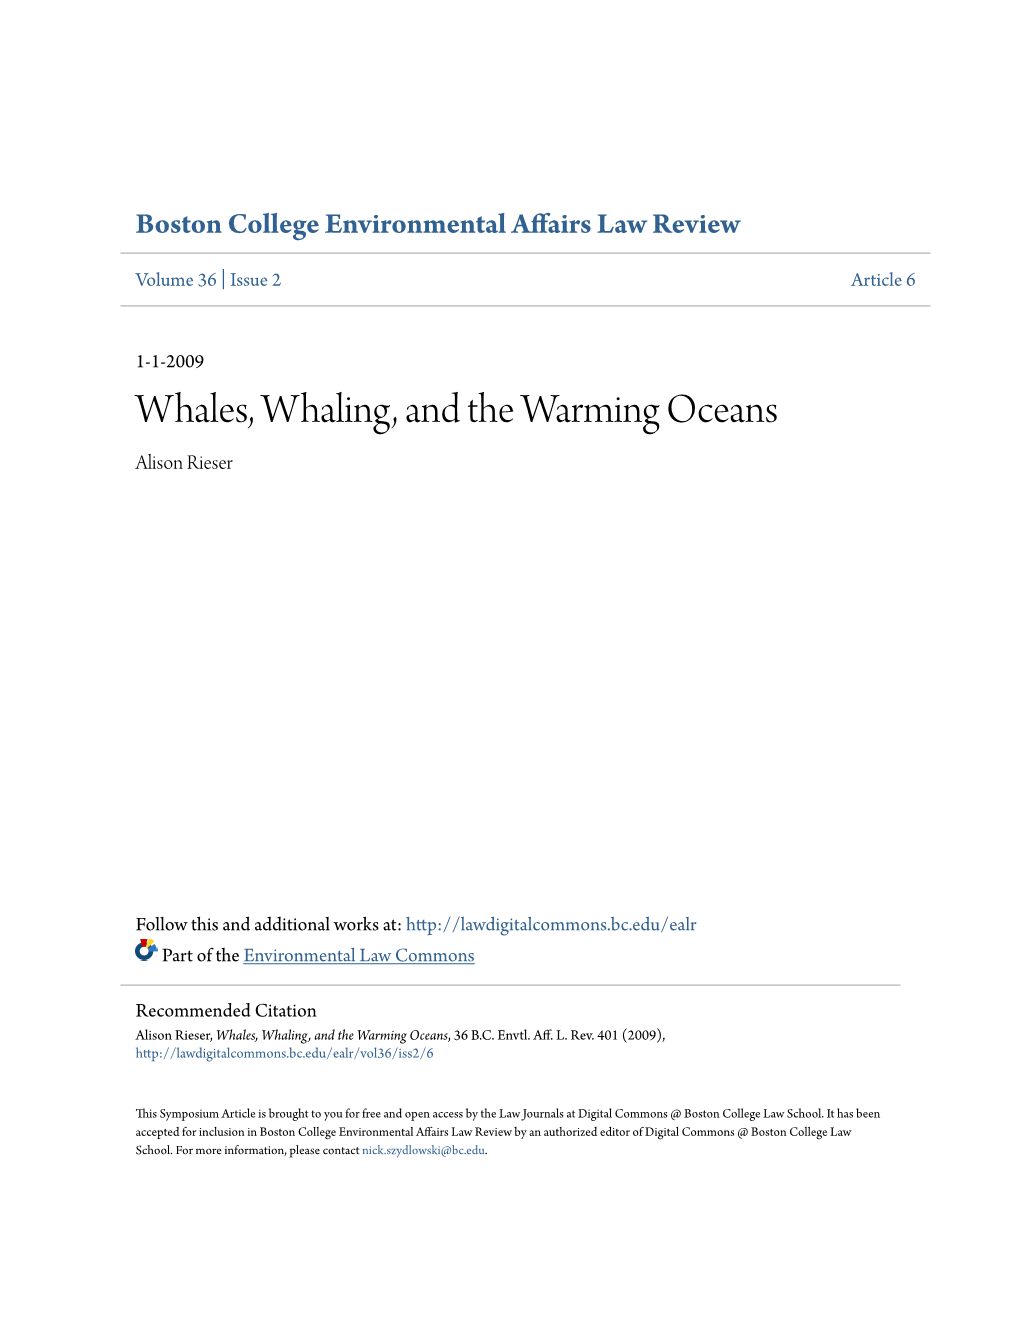 Whales, Whaling, and the Warming Oceans Alison Rieser